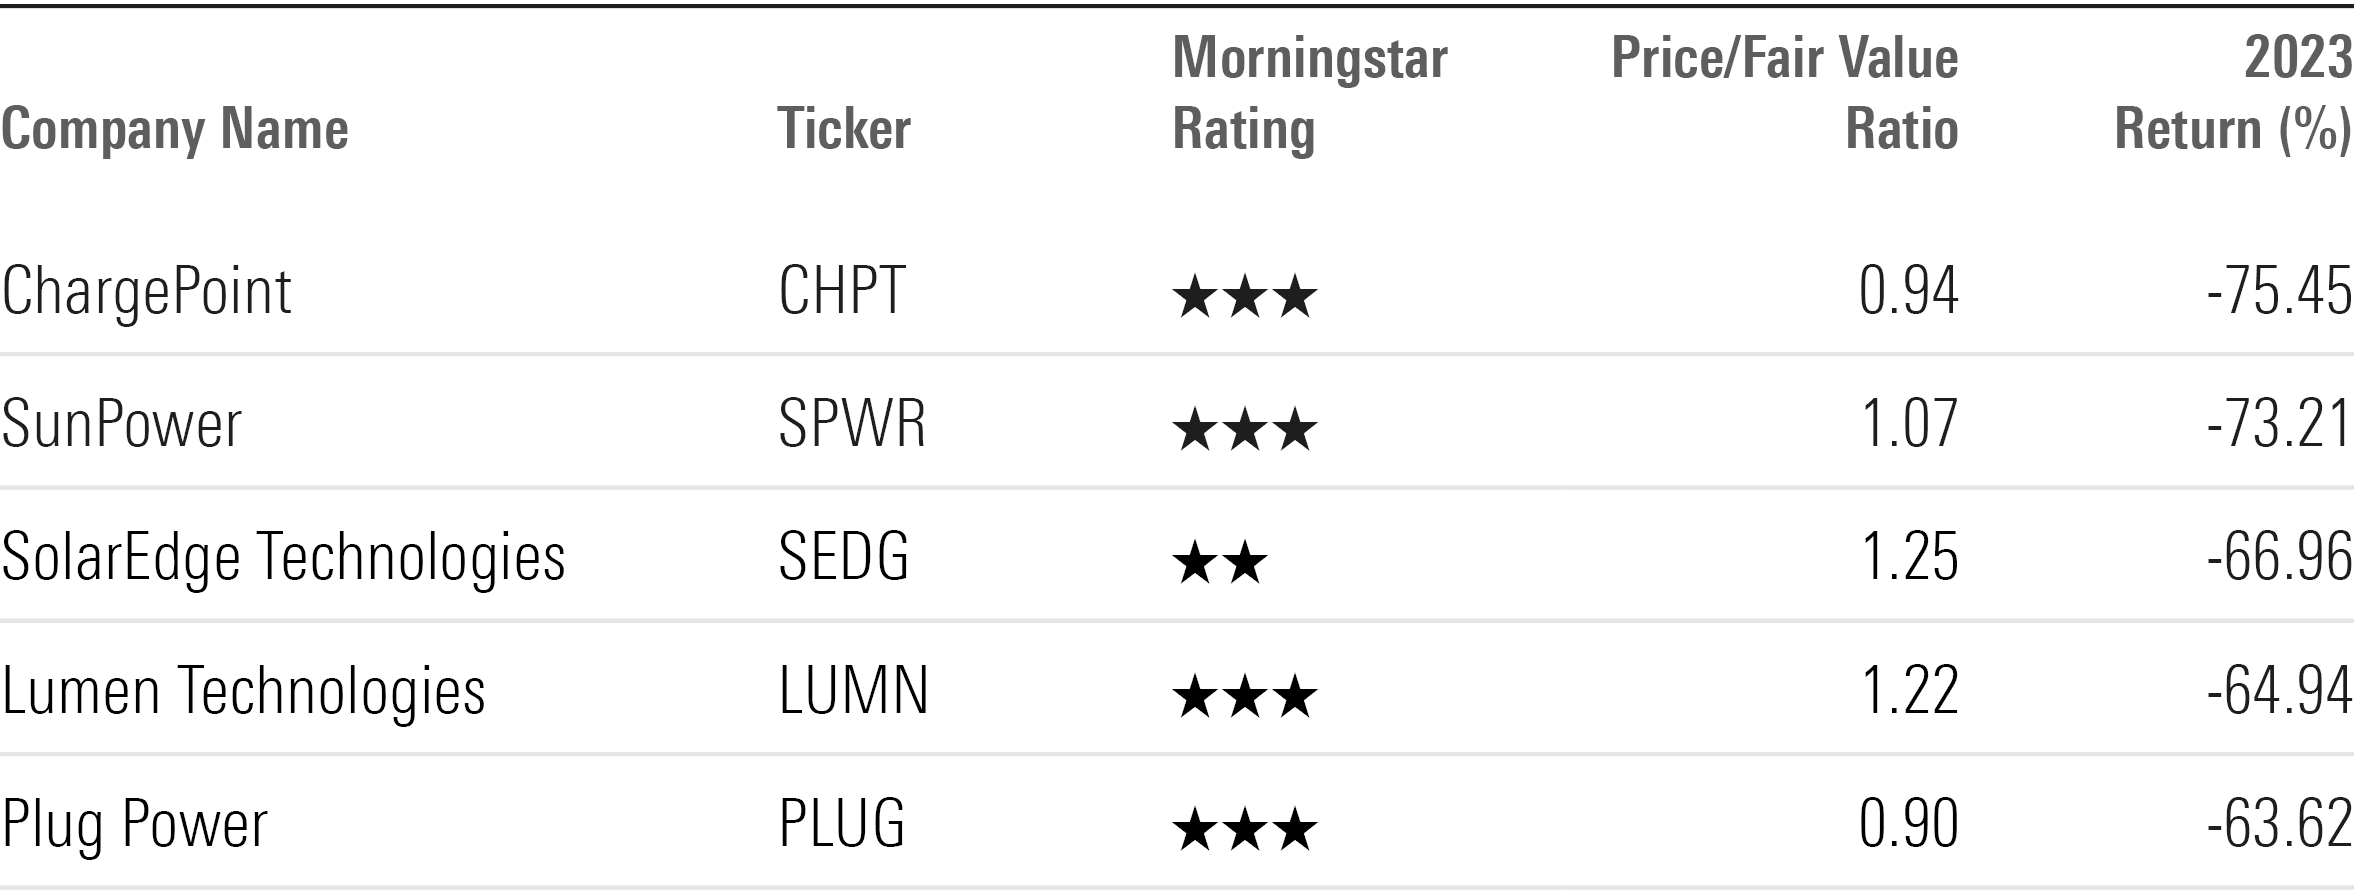 Table showing ticker, Morningstar Rating, price/fair value ratio, and 2023 return for the worst-performing stocks of 2023.